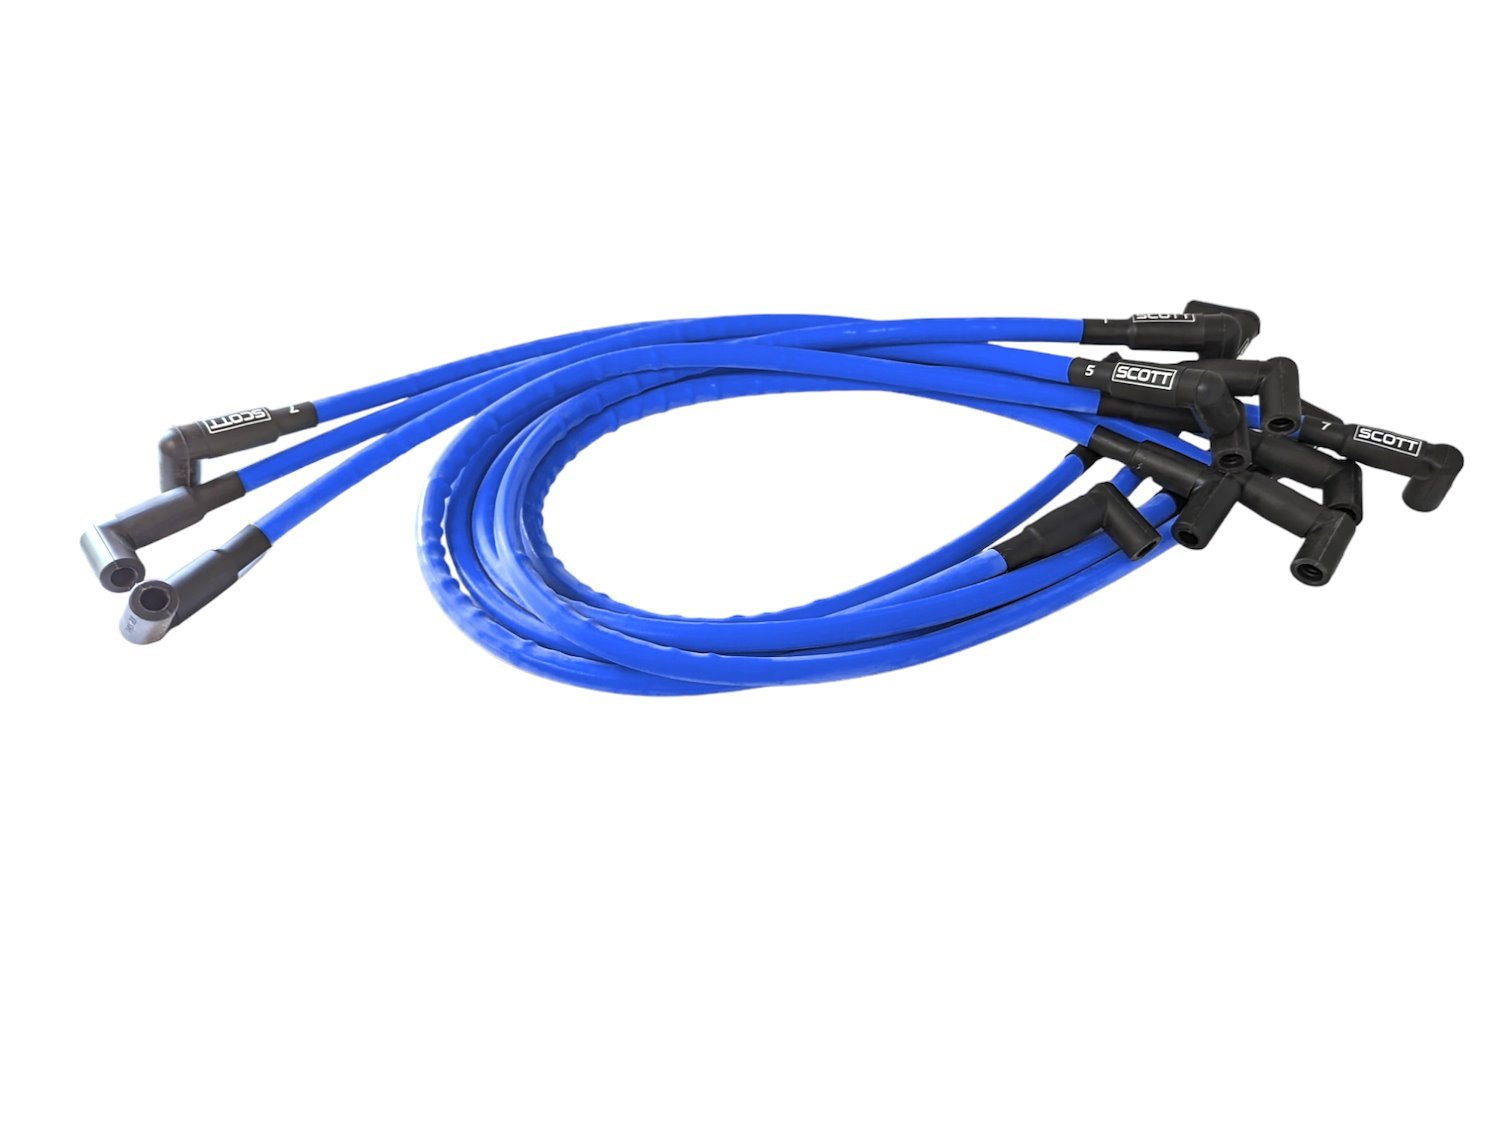 SPW-CH-407-4 High-Performance Silicone-Sleeved Spark Plug Wire Set for Small Block Chevy, Under Header [Blue]